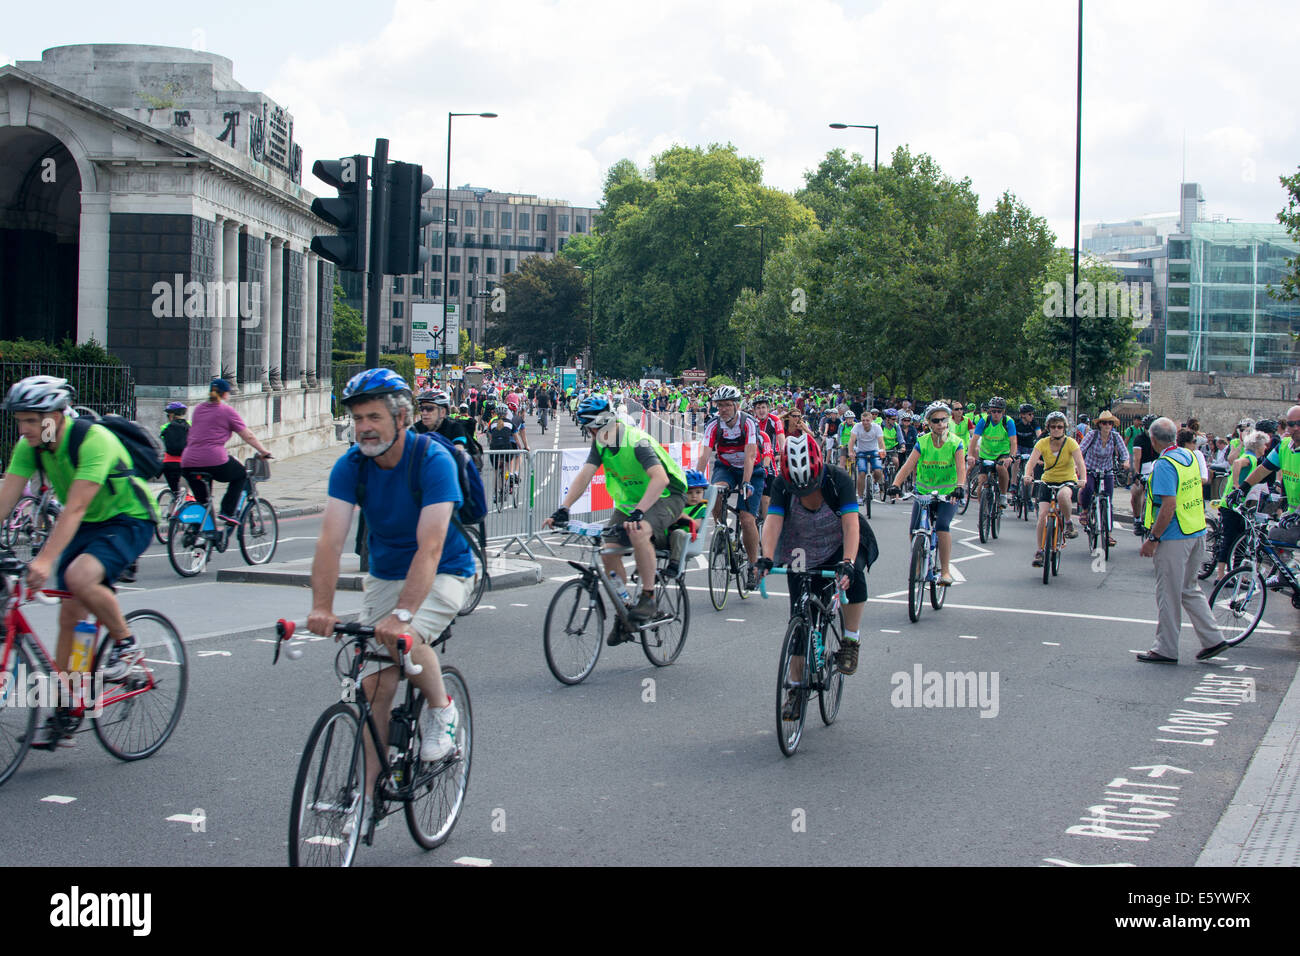 London, UK. 9th August, 2014. Cyclists participating in the Prudential Ride London event on Saturday 9th August, London, United Kingdom Credit:  doniphane dupriez/Alamy Live News Stock Photo